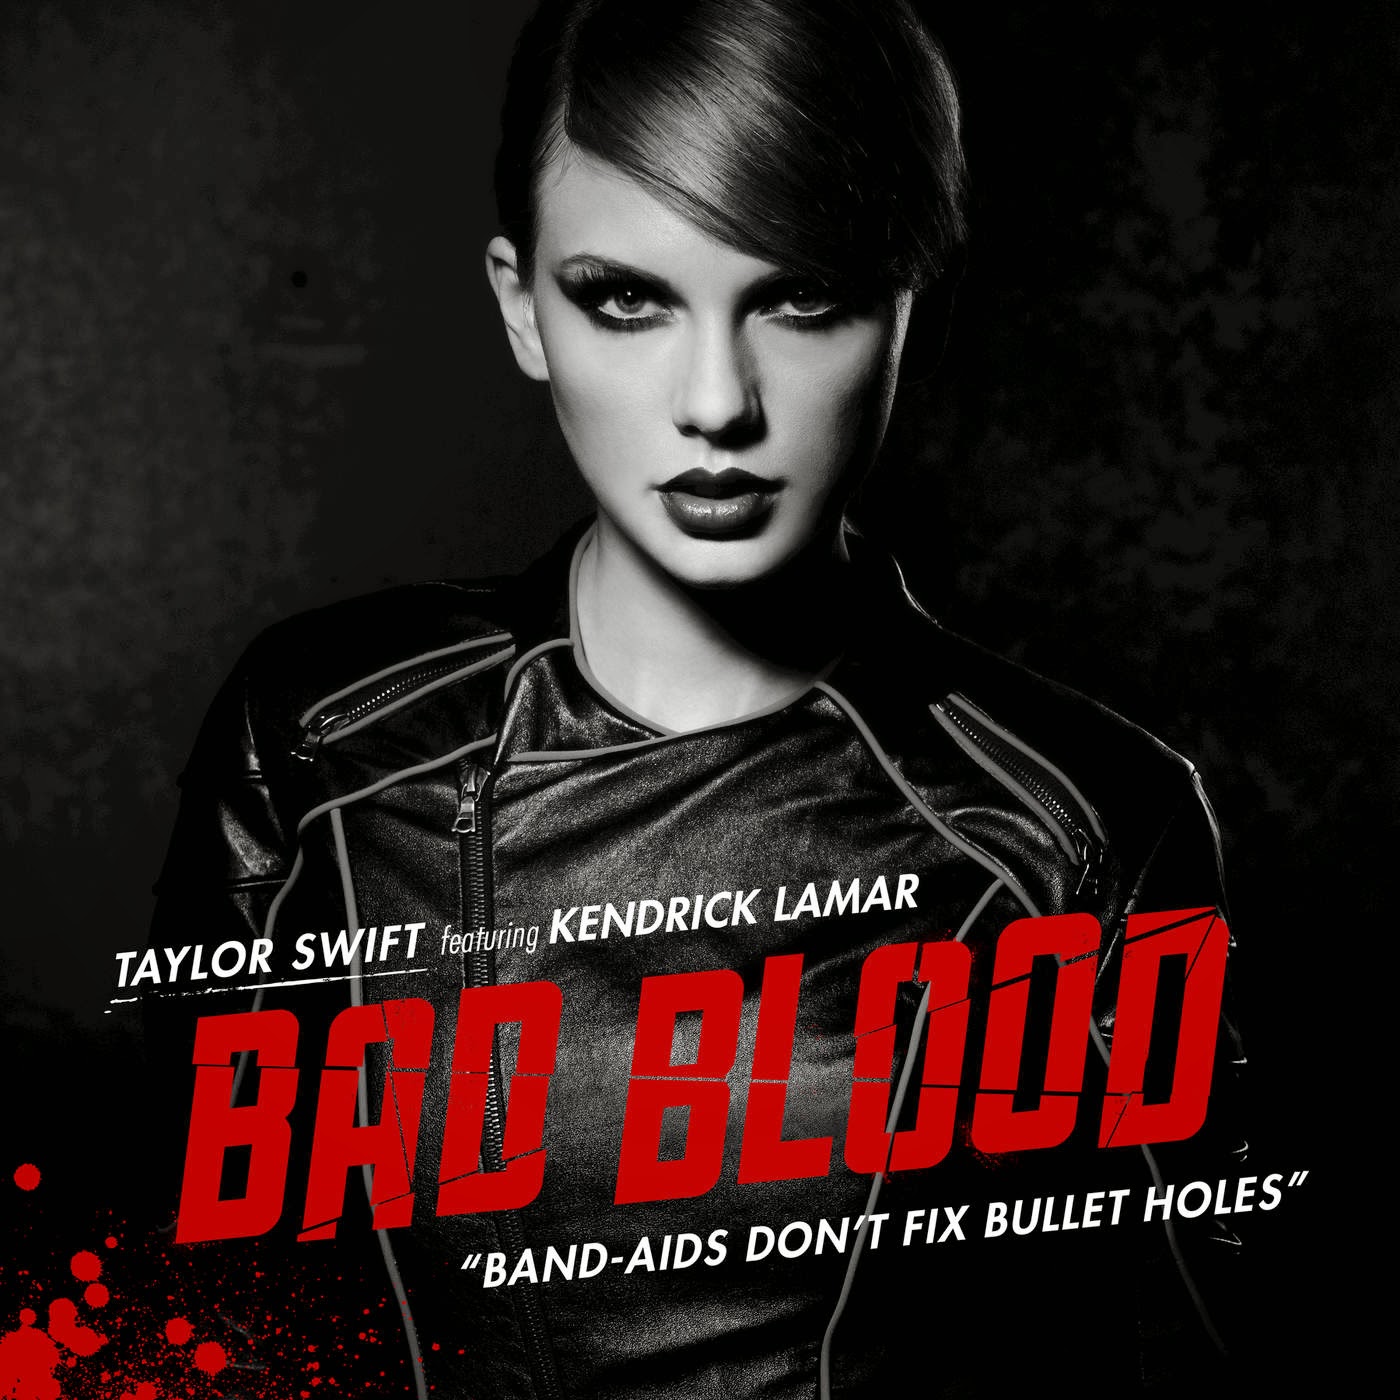 Taylor Swift as Catastrophe in "Bad Blood."